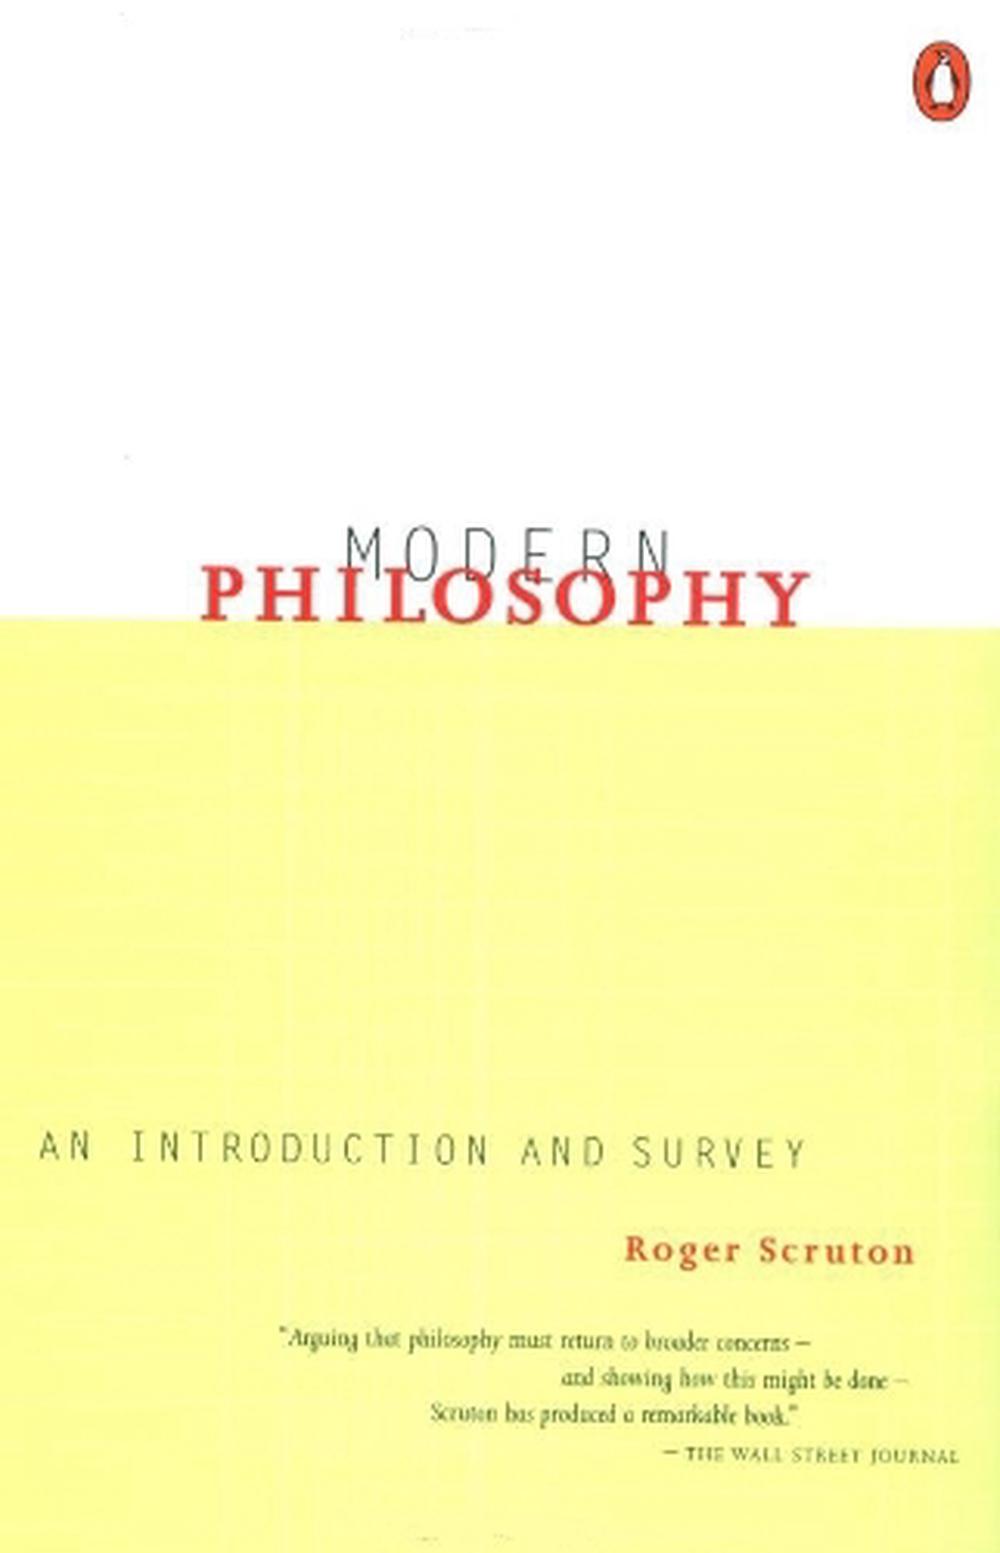 research paper on modern philosophy